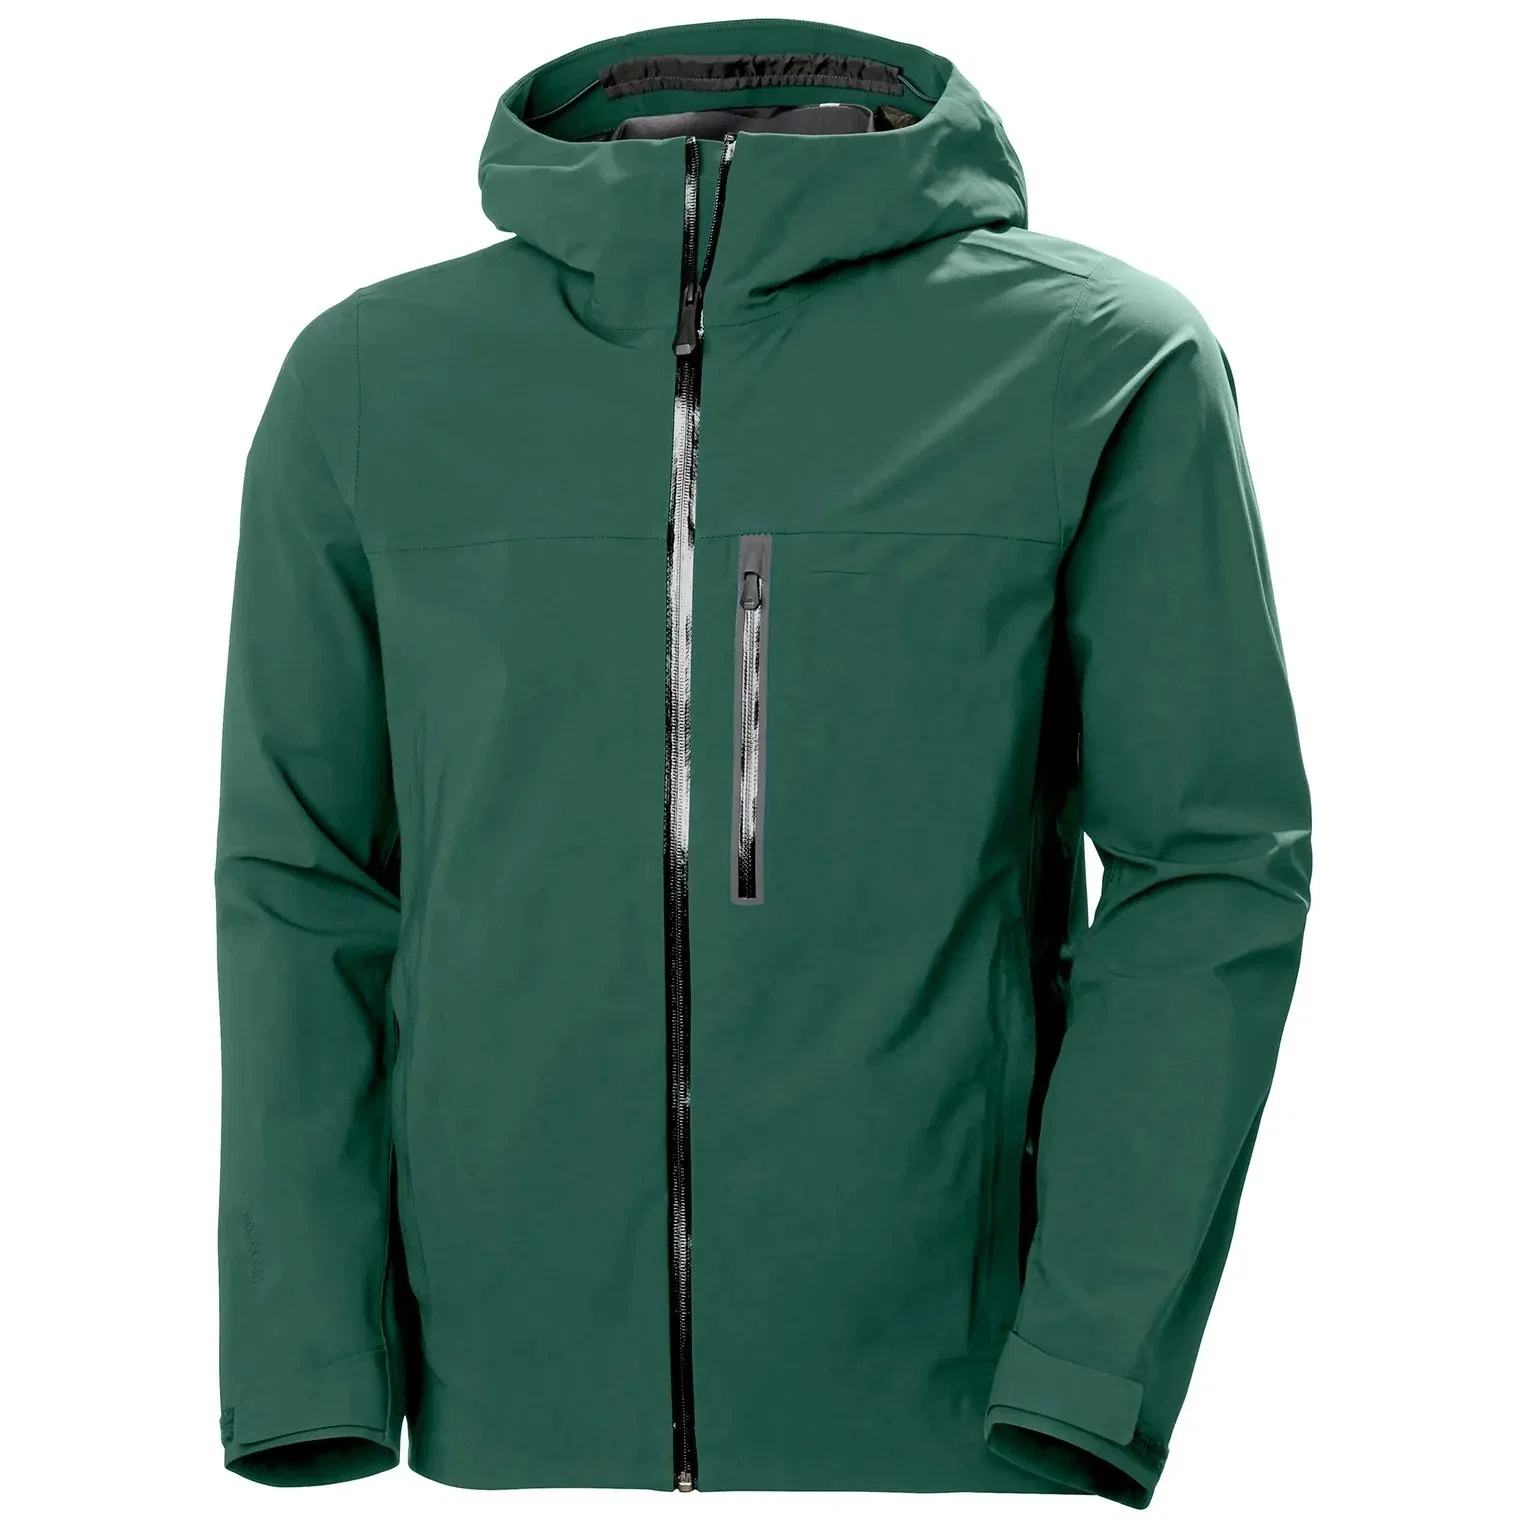 Outdoor Winter Apparel for Men: Customizable Ski Jacket with Padding and Hood